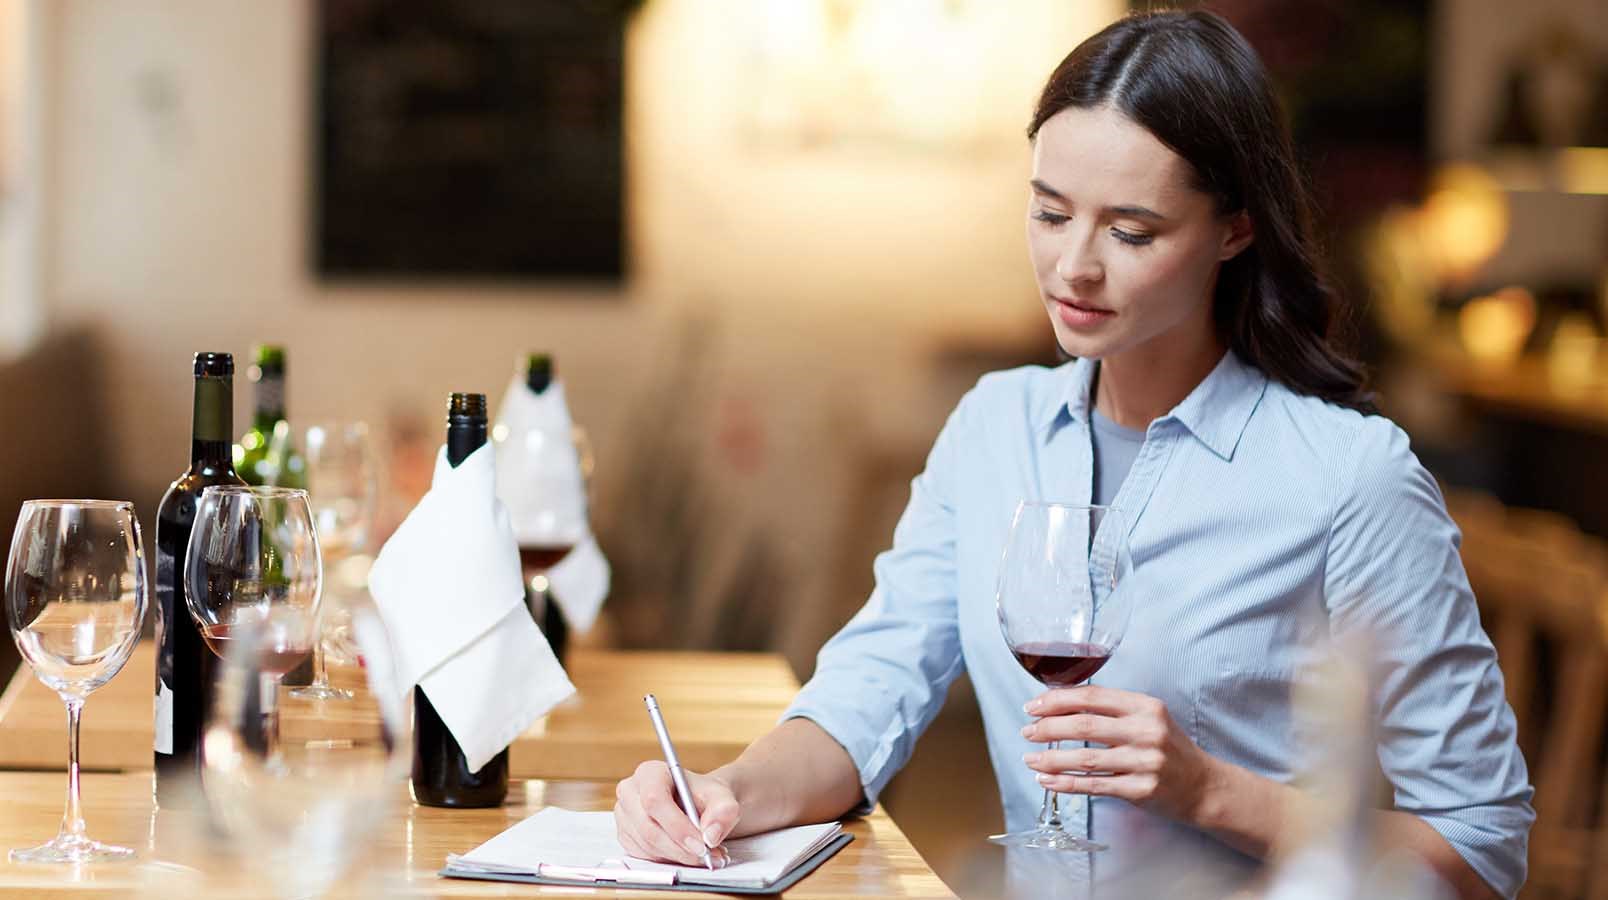 All you need to know about the WSET Diploma | Wine & Spirit Education Trust